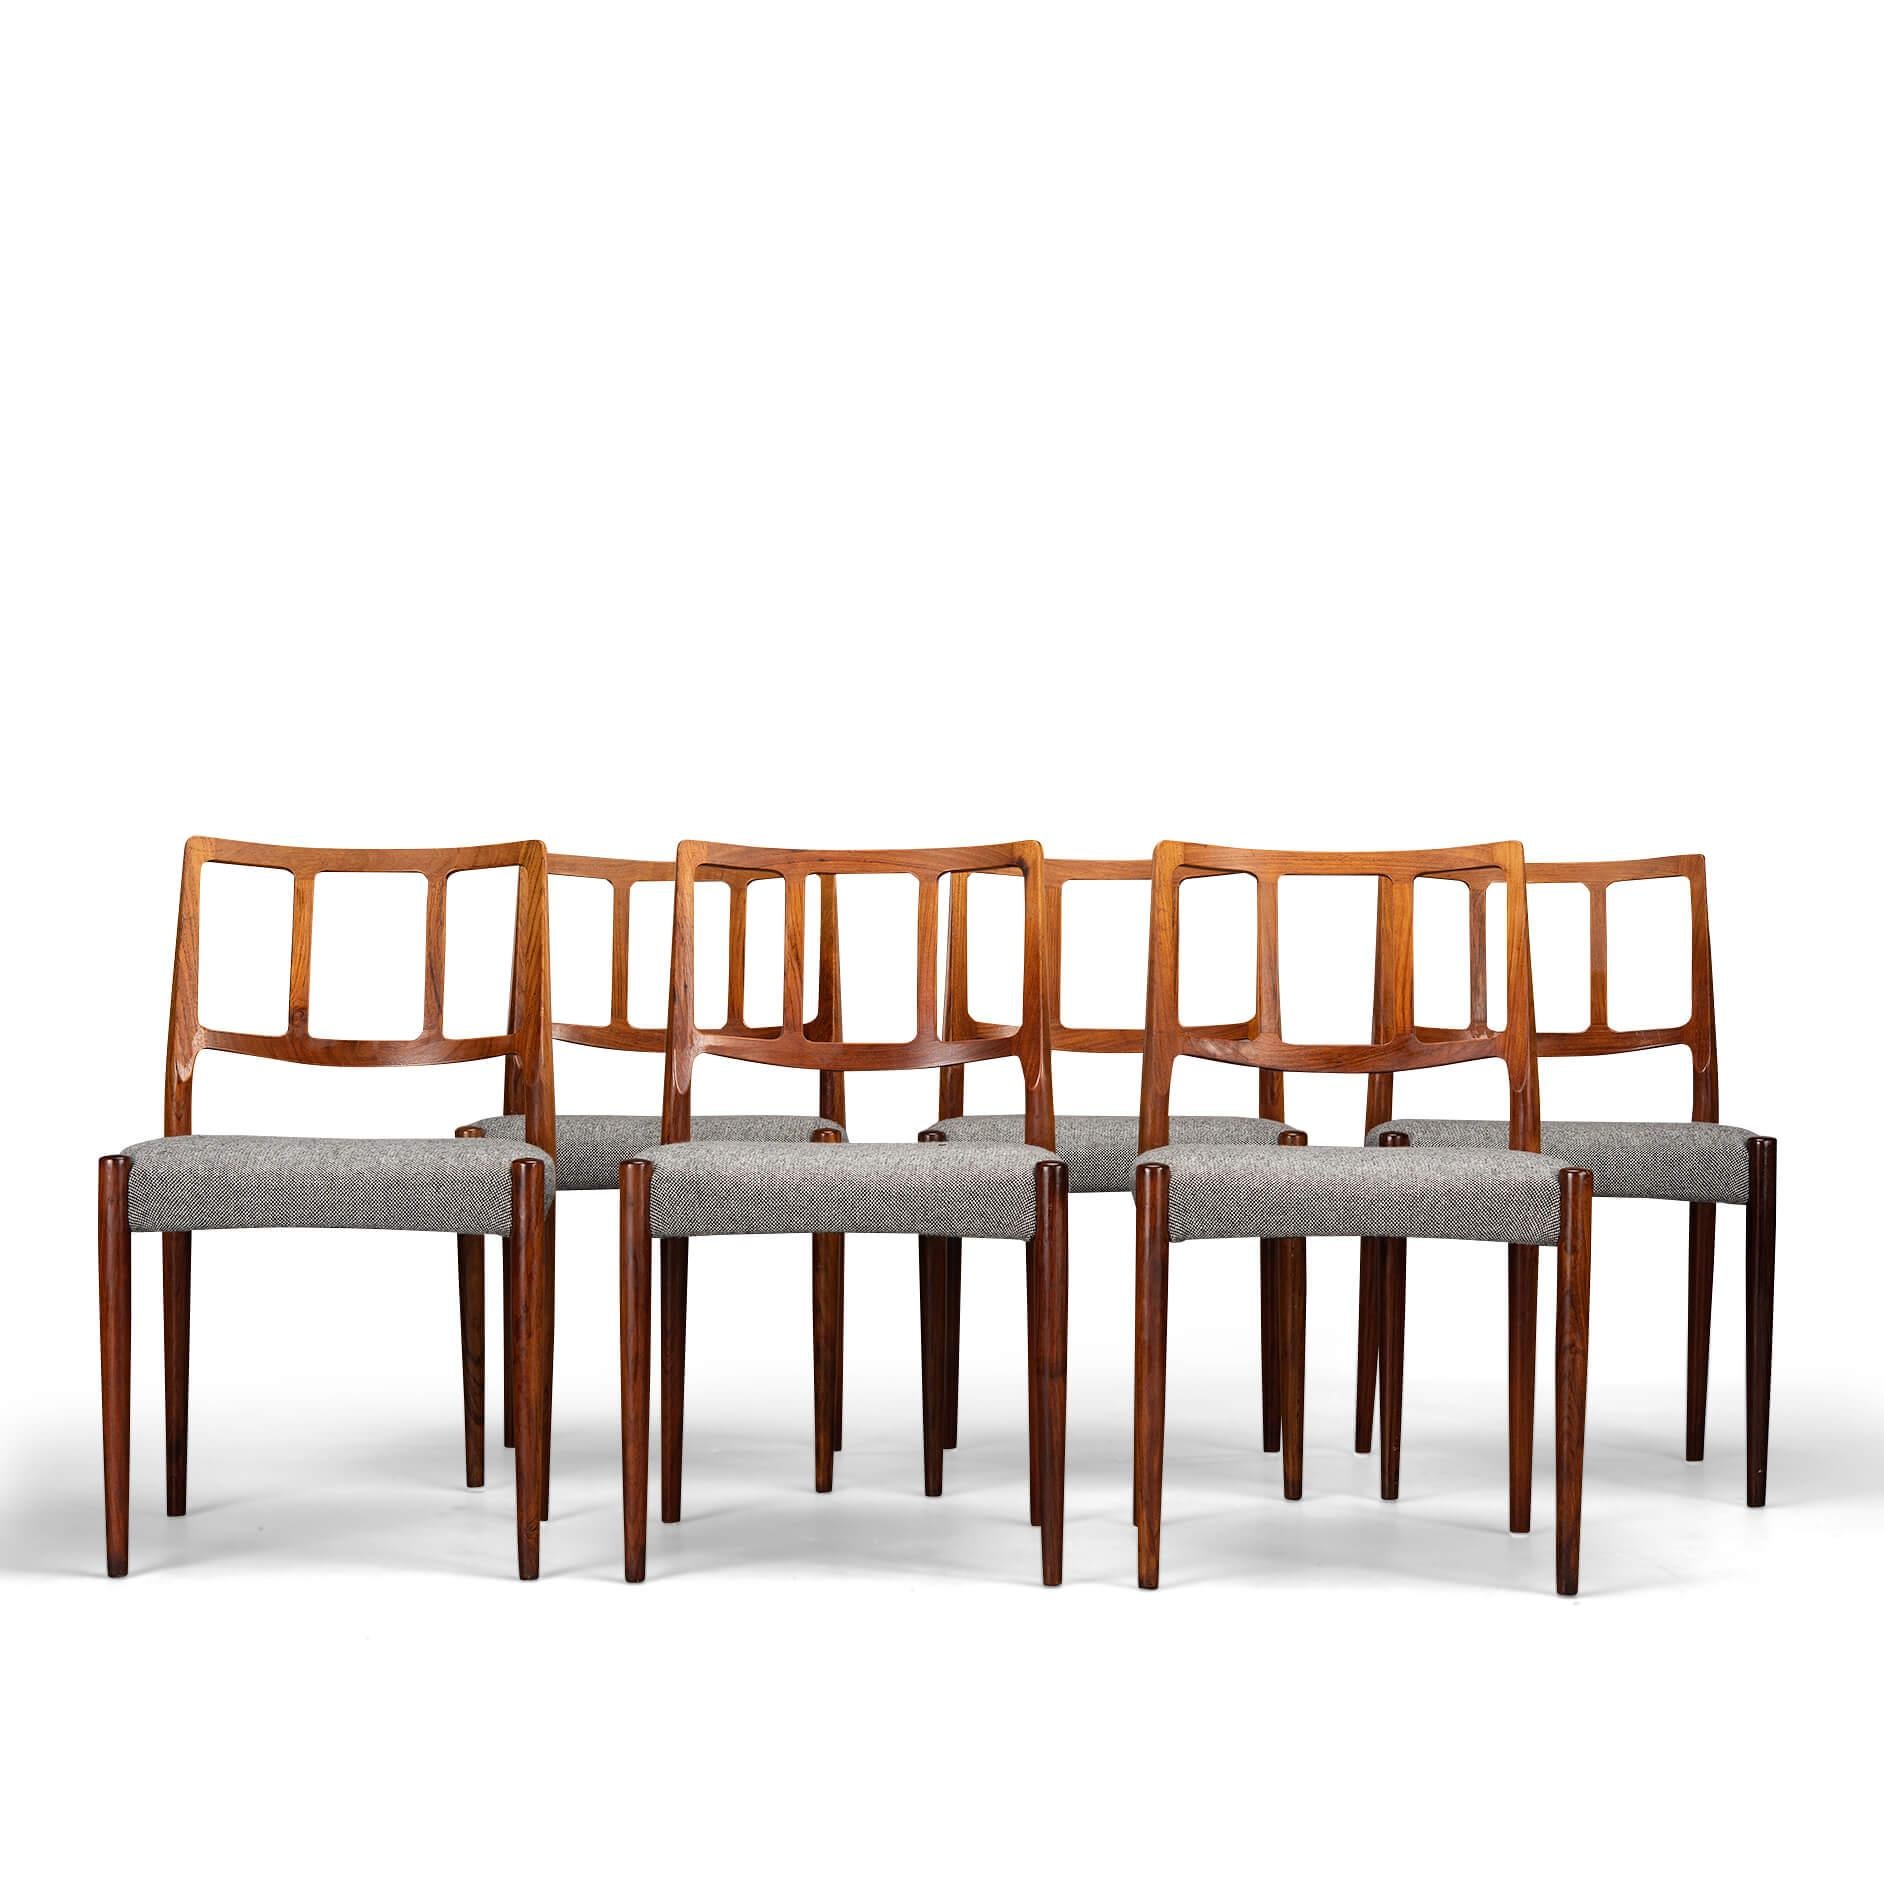 Mid-Century Modern Reupholstered Rosewood Dining Chair by Johannes Andersen for Uldum, Set of 6 For Sale